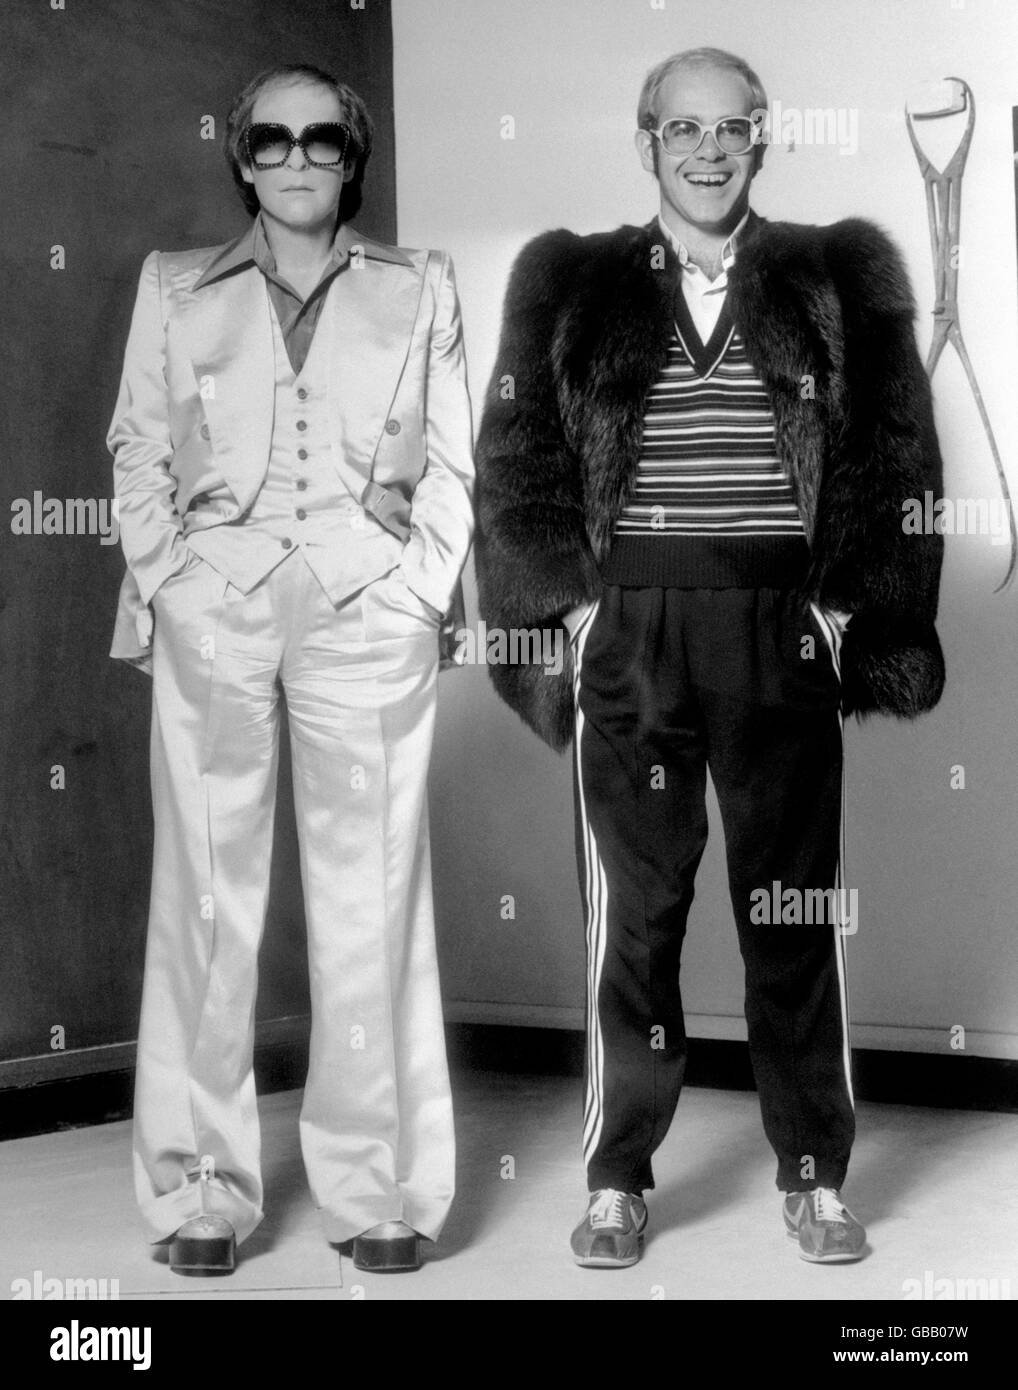 Super pop star Elton John (right) with his wax portrait in Madame Tussaud's studio. The figure joined a new version of Heroes - a space where figures appear out of the dark in a sequence of light, sound and projection. Stock Photo